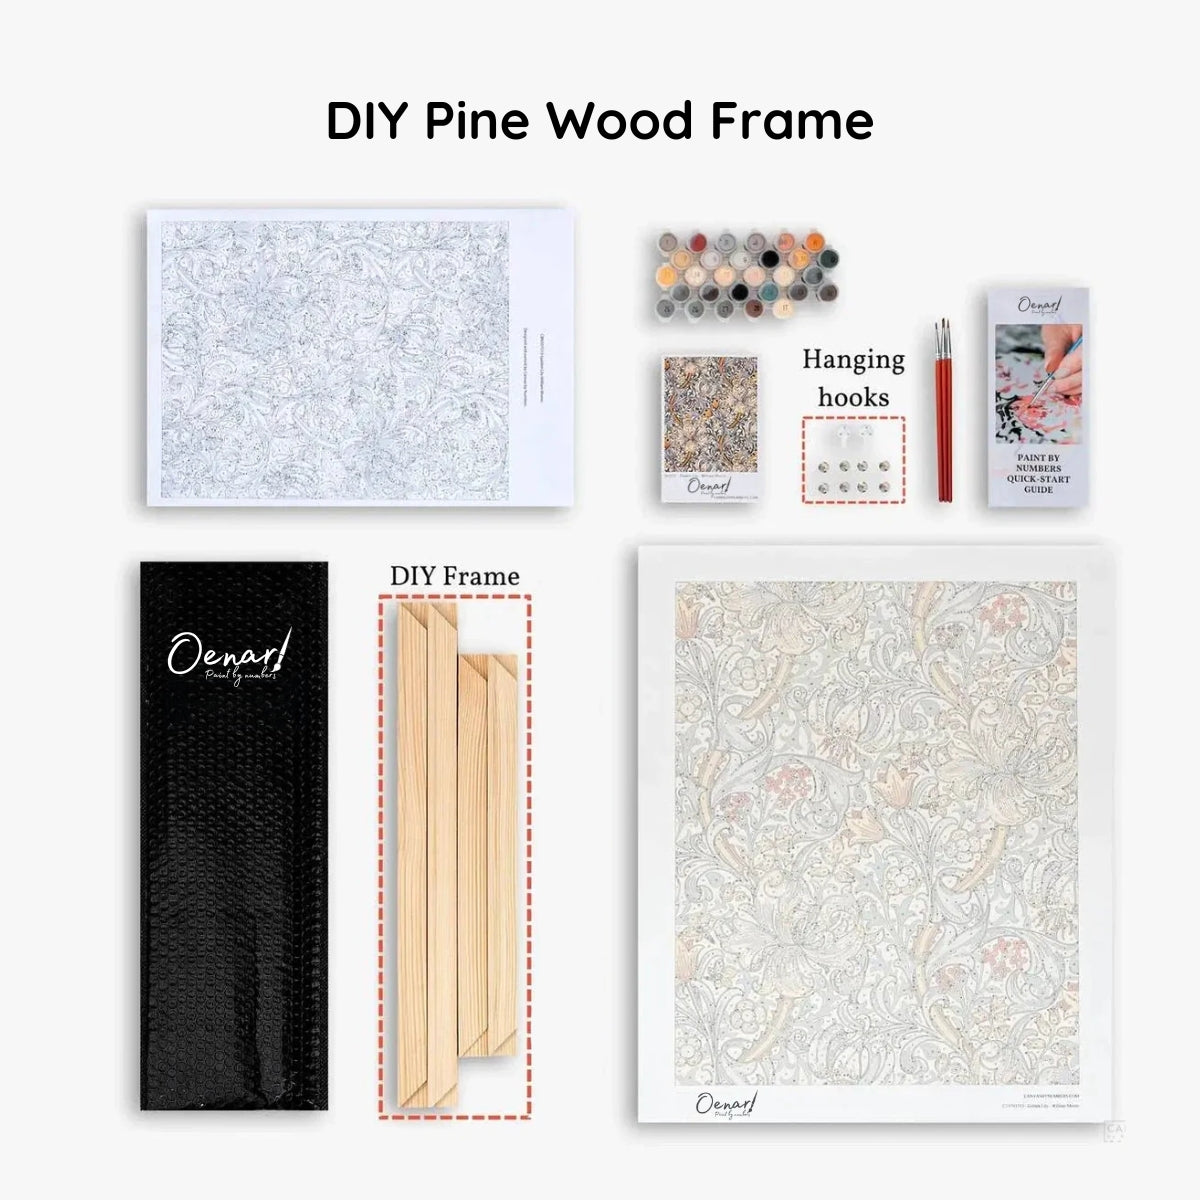 Oenart, whats included in our Paint by numbers kit - DIY Frame Version